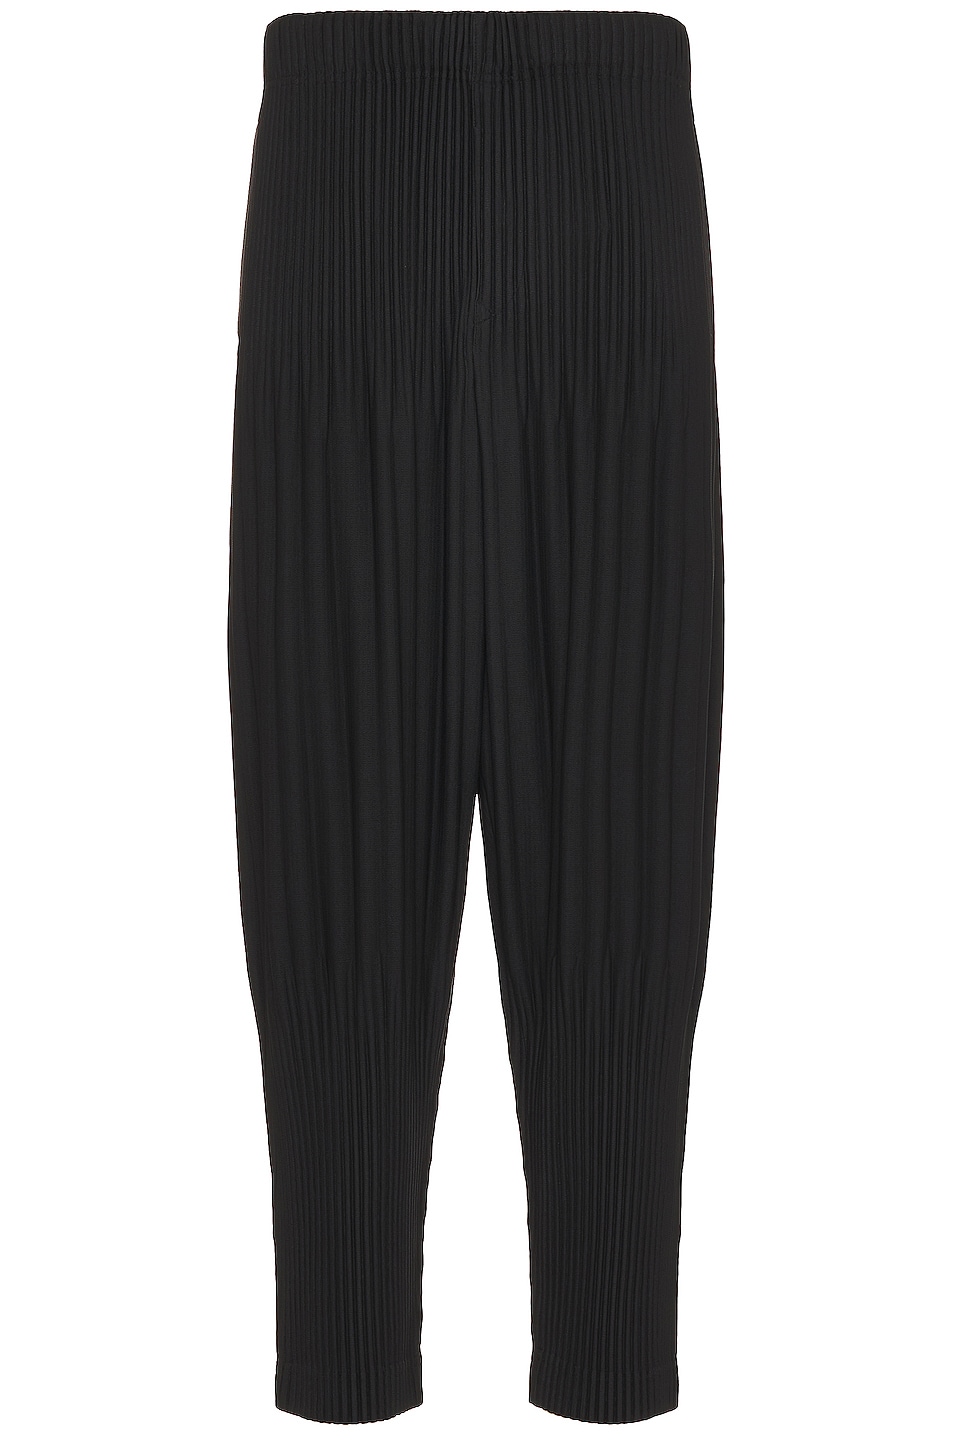 Image 1 of Homme Plisse Issey Miyake Basics Relaxed Pant in Black